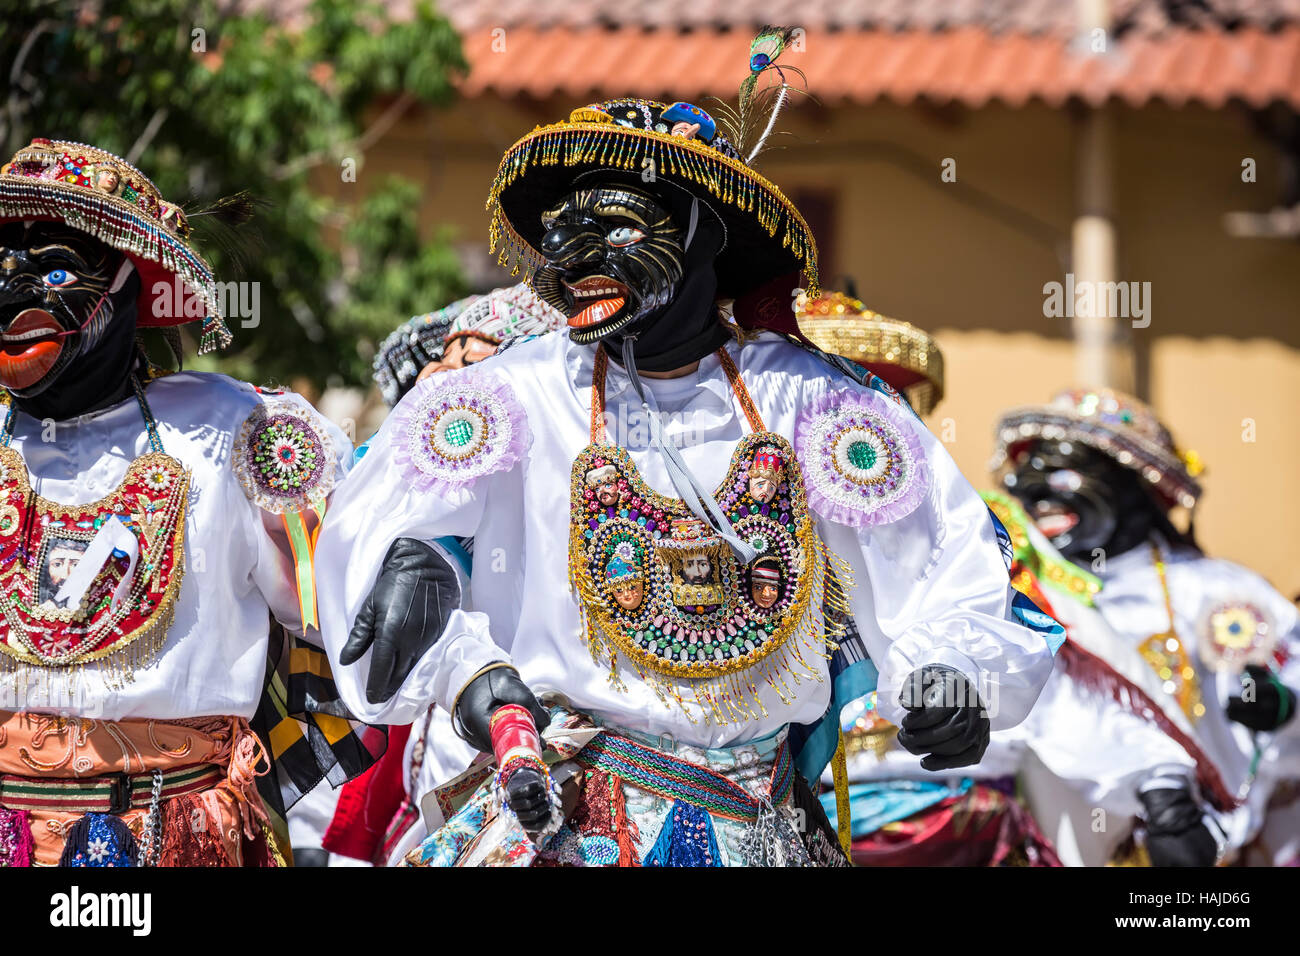 Men wearing colorful costumes during religious procession, Ollantaytambo, Cusco, Peru Stock Photo